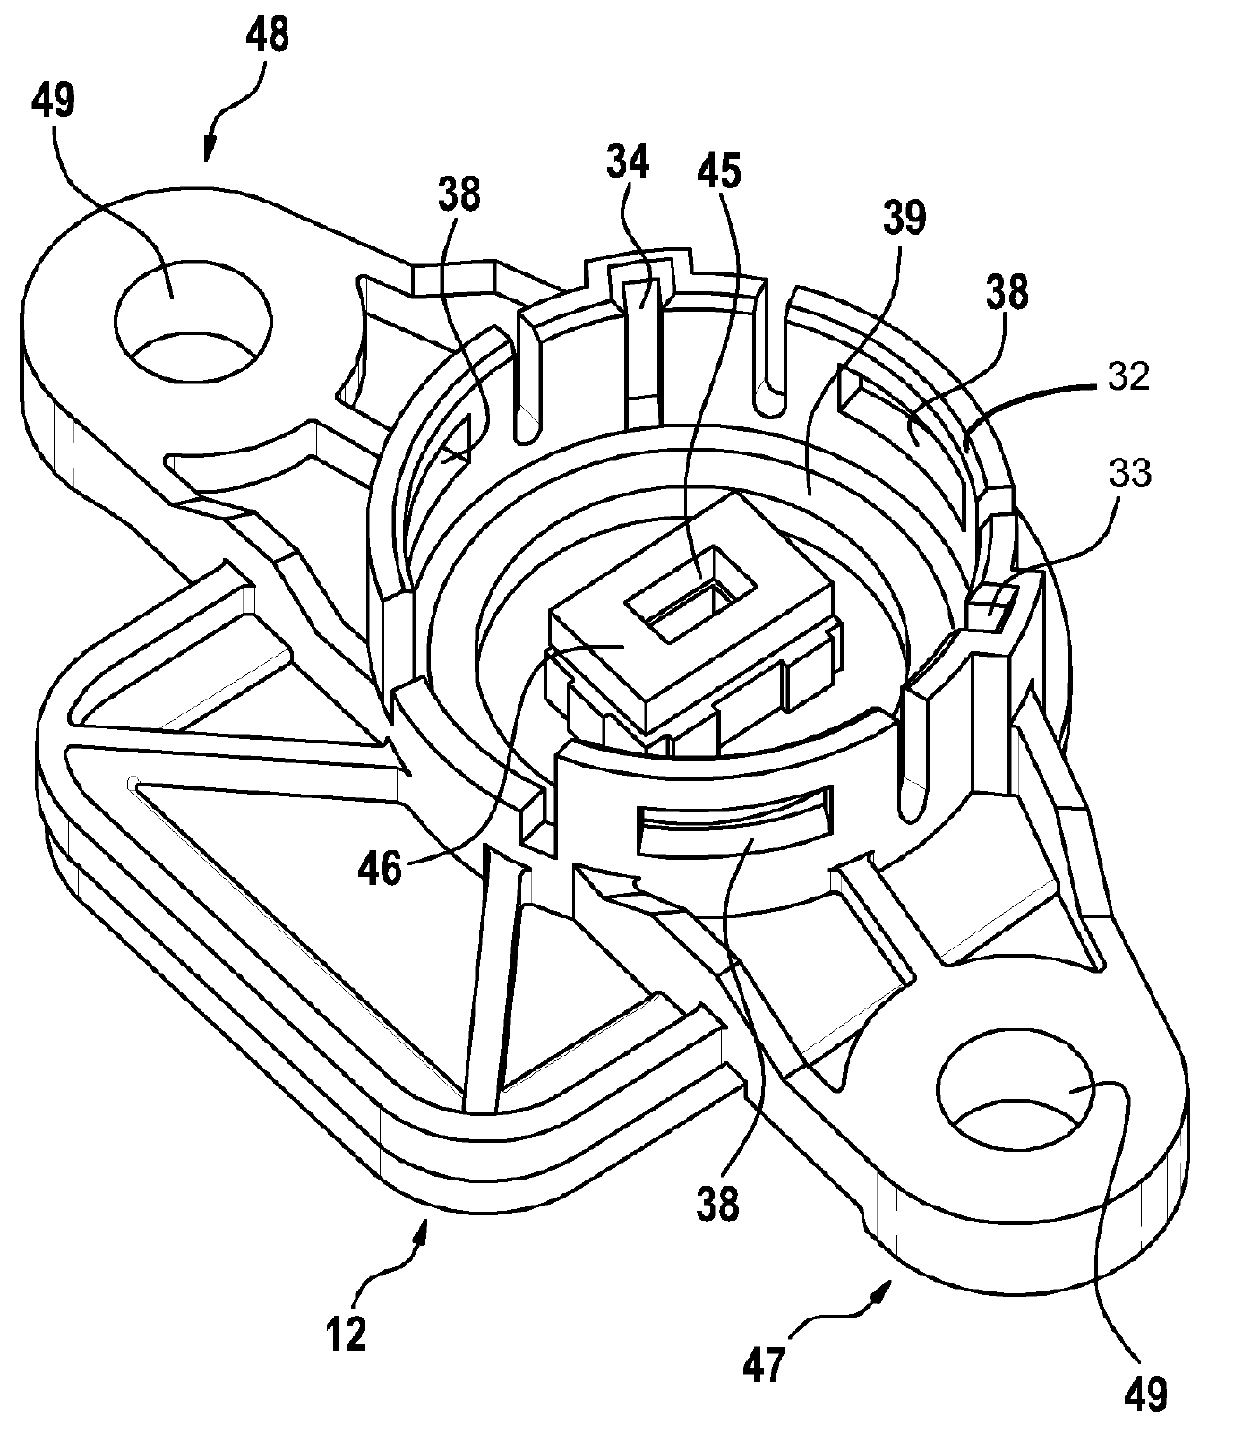 Sensor device, in particular for use in a motor vehicle